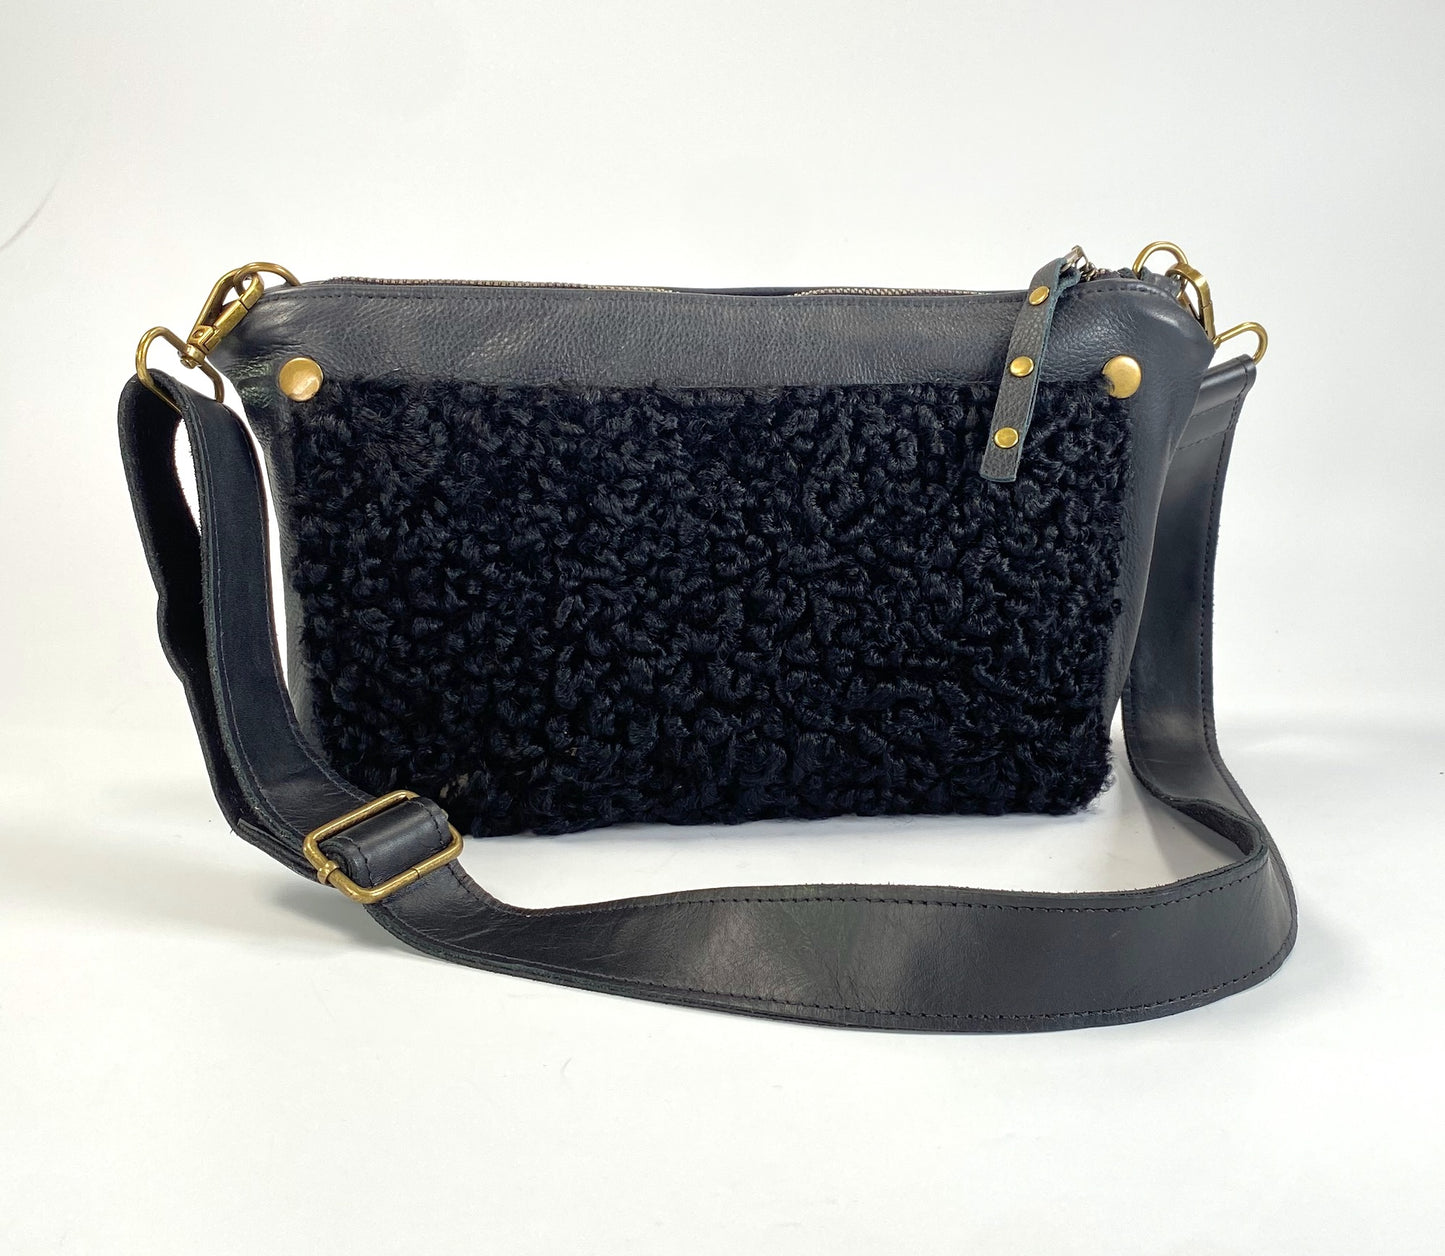 Black Leather Shoulder Purse with Sherpa Accent & Suede Ribbon Adjustable Strap